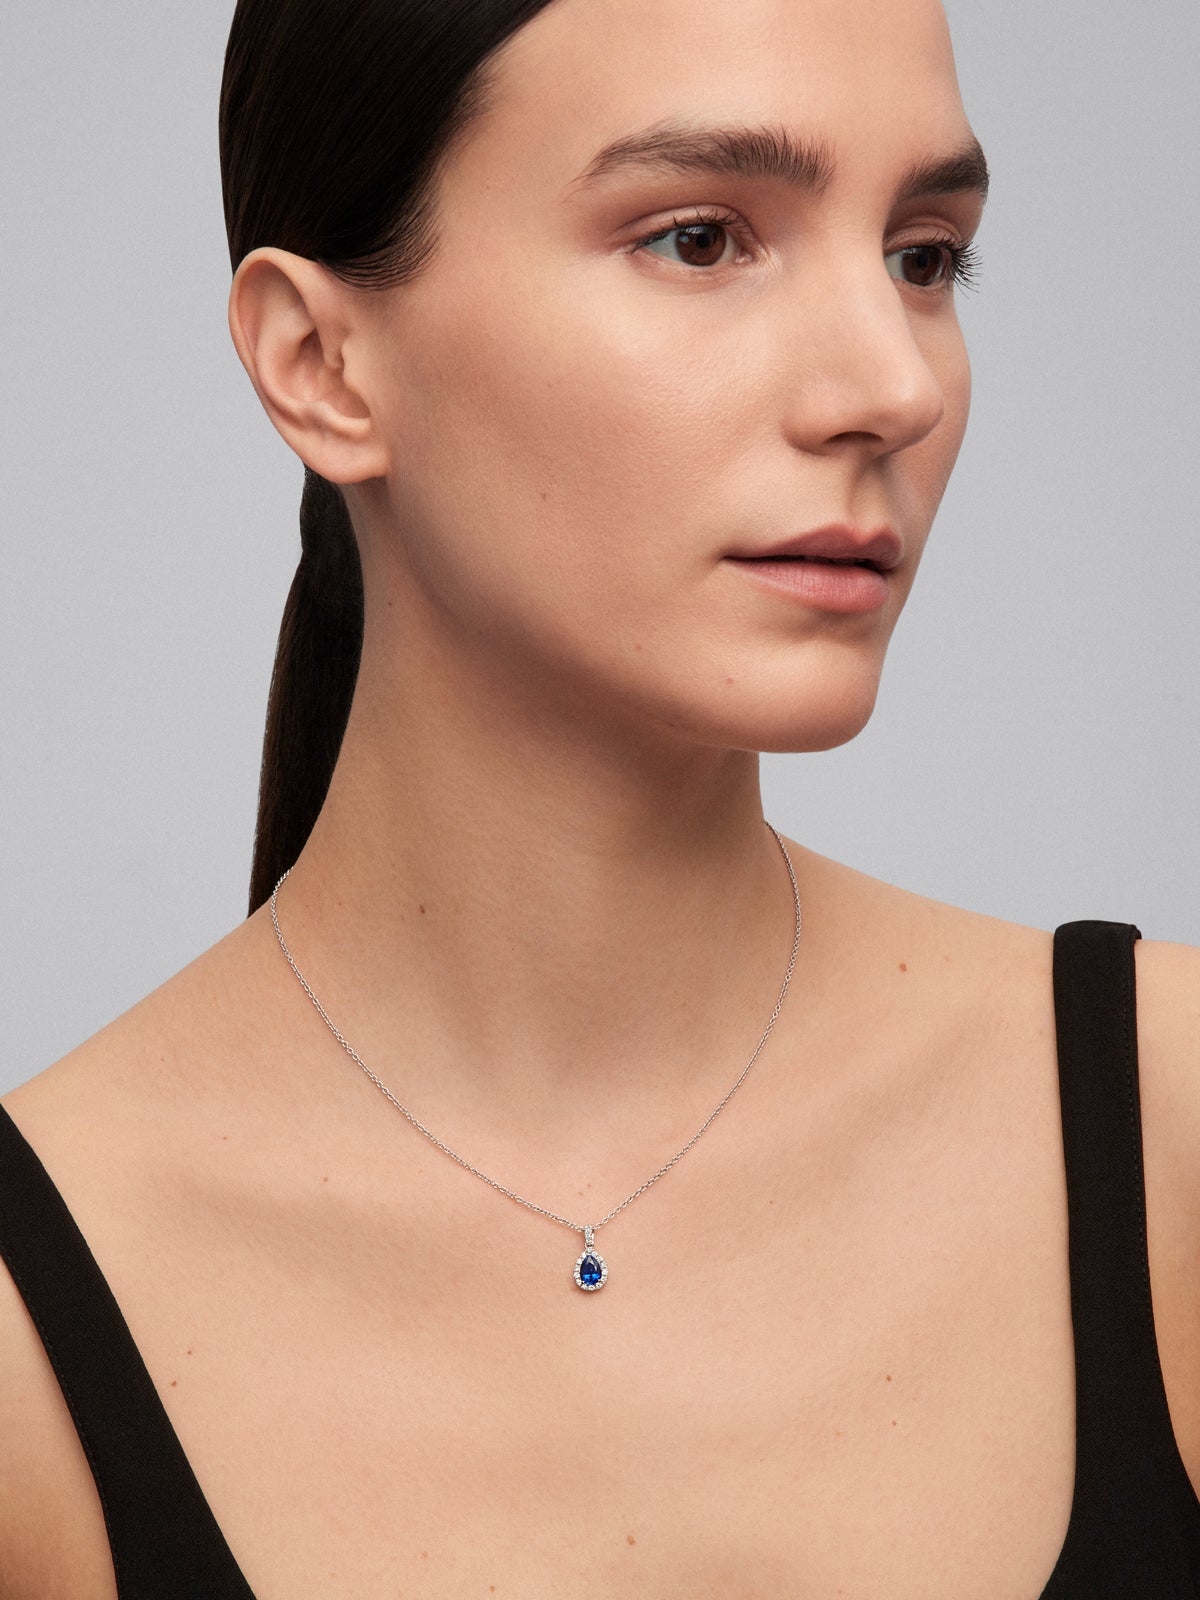 18K white gold pendant with pear-cut blue sapphire of 1.17 cts and 18 brilliant-cut diamonds with a total of 0.19 cts